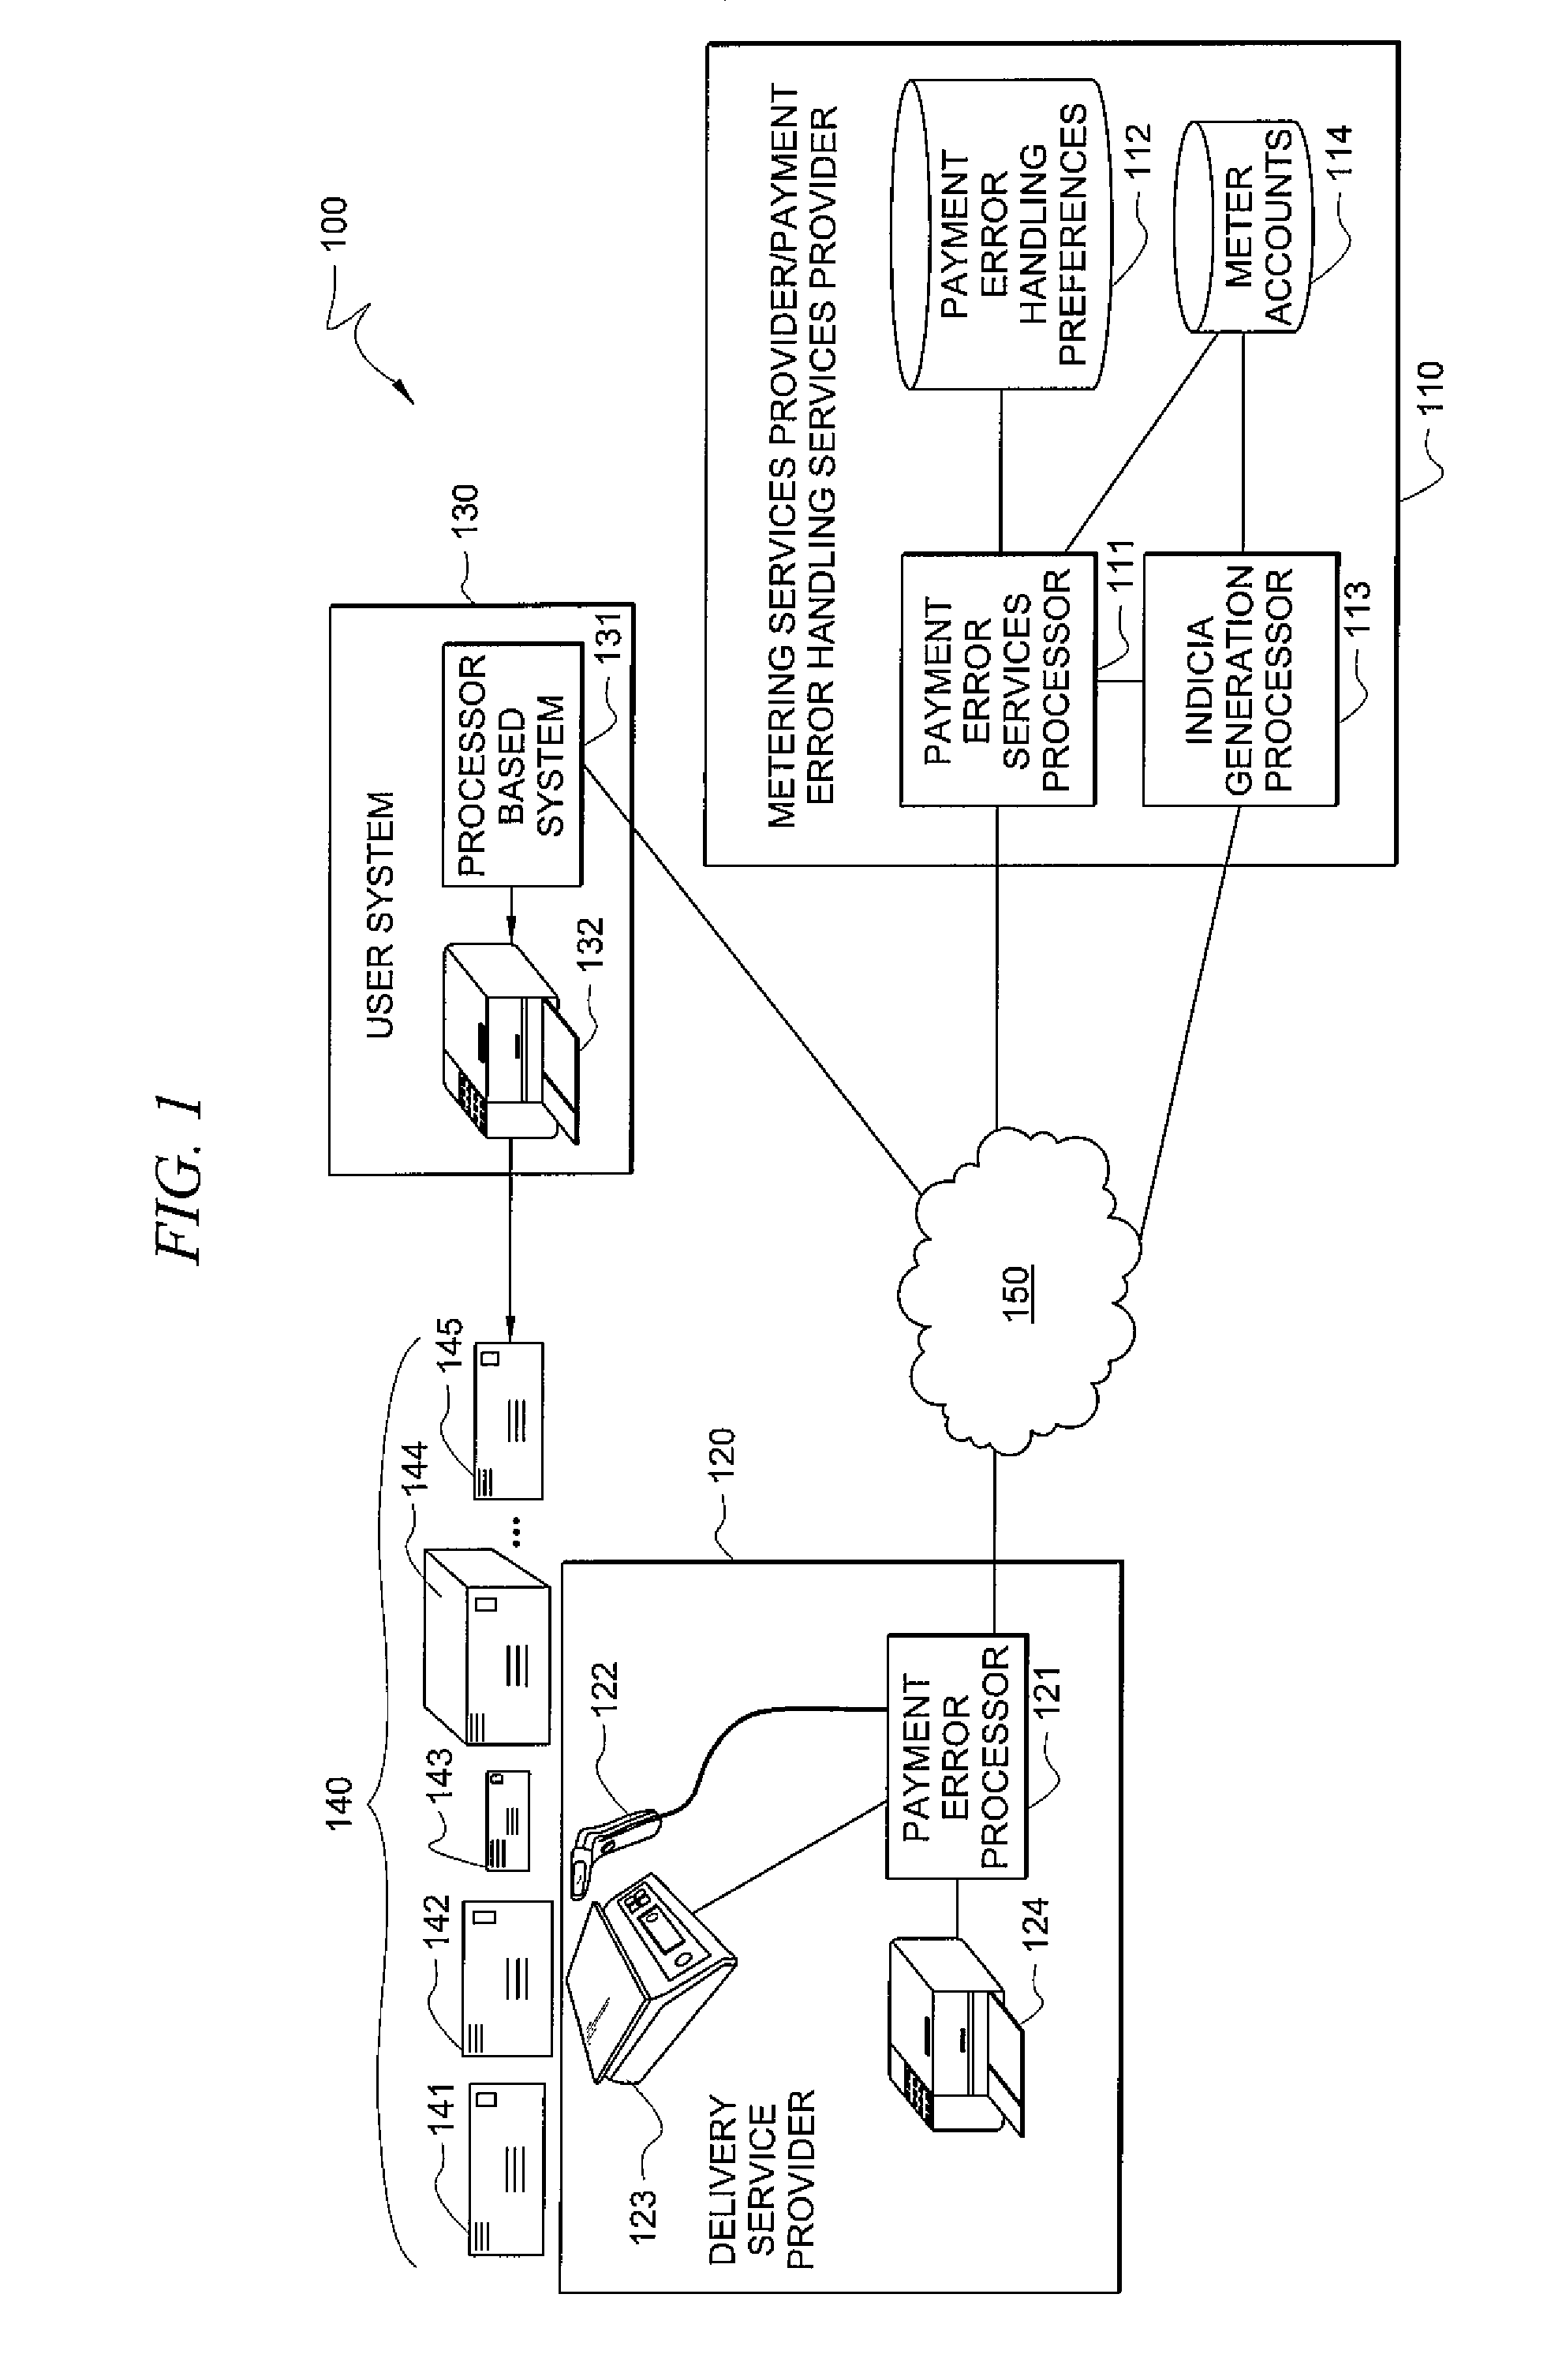 System and method for handling payment errors with respect to delivery services